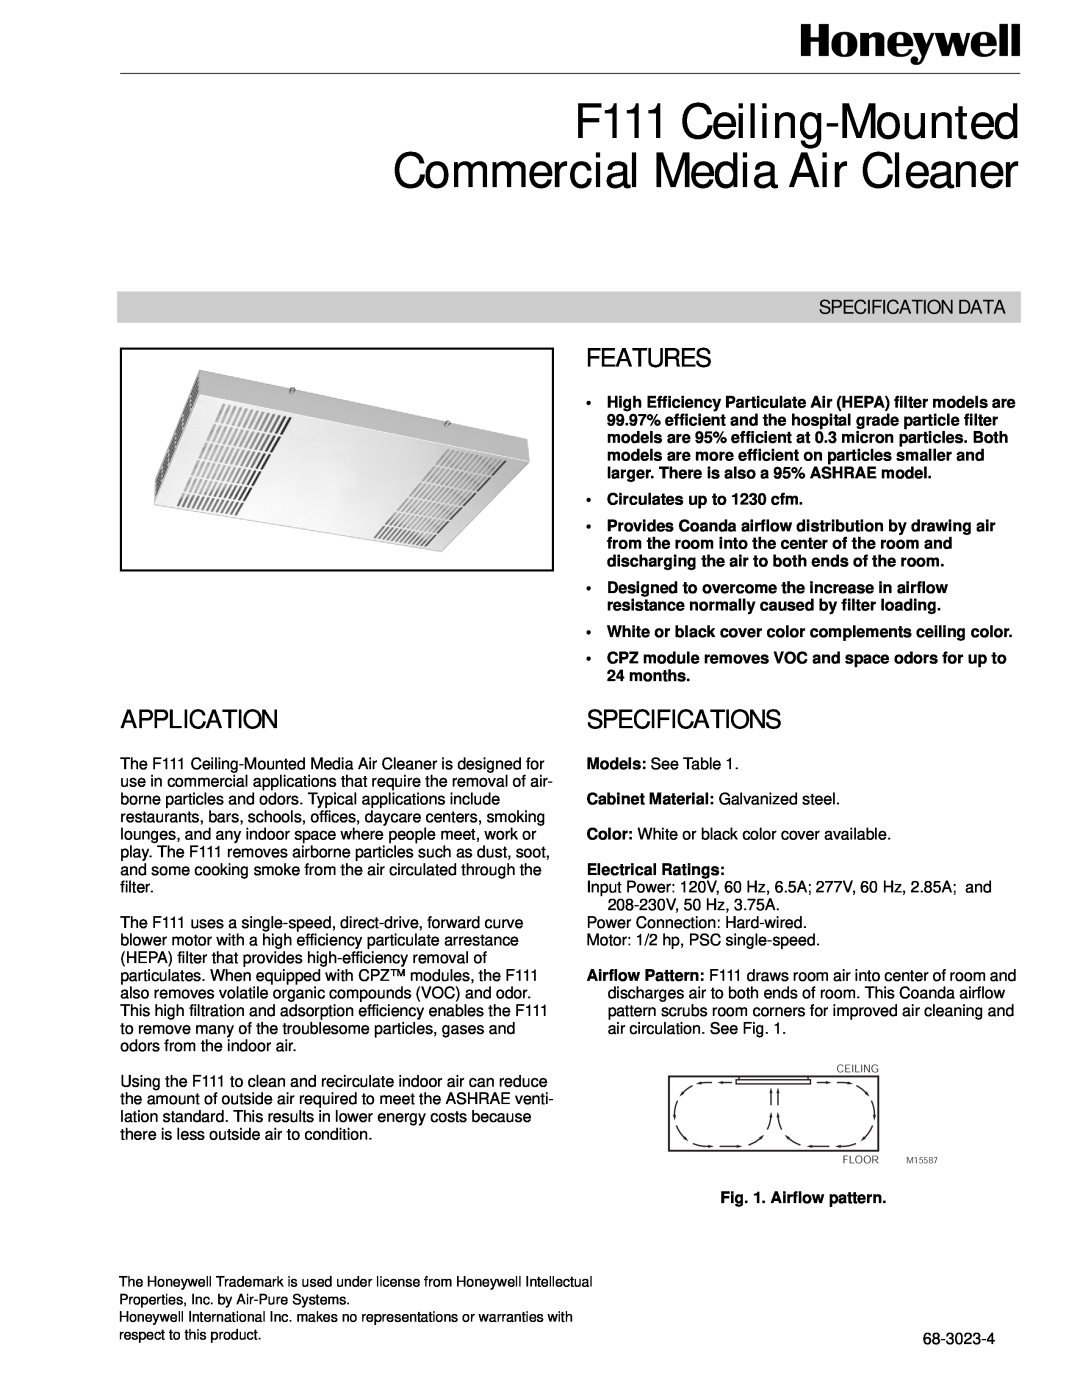 Honeywell specifications F111 Ceiling-MountedCommercial Media Air Cleaner, Features, Application, Specifications 